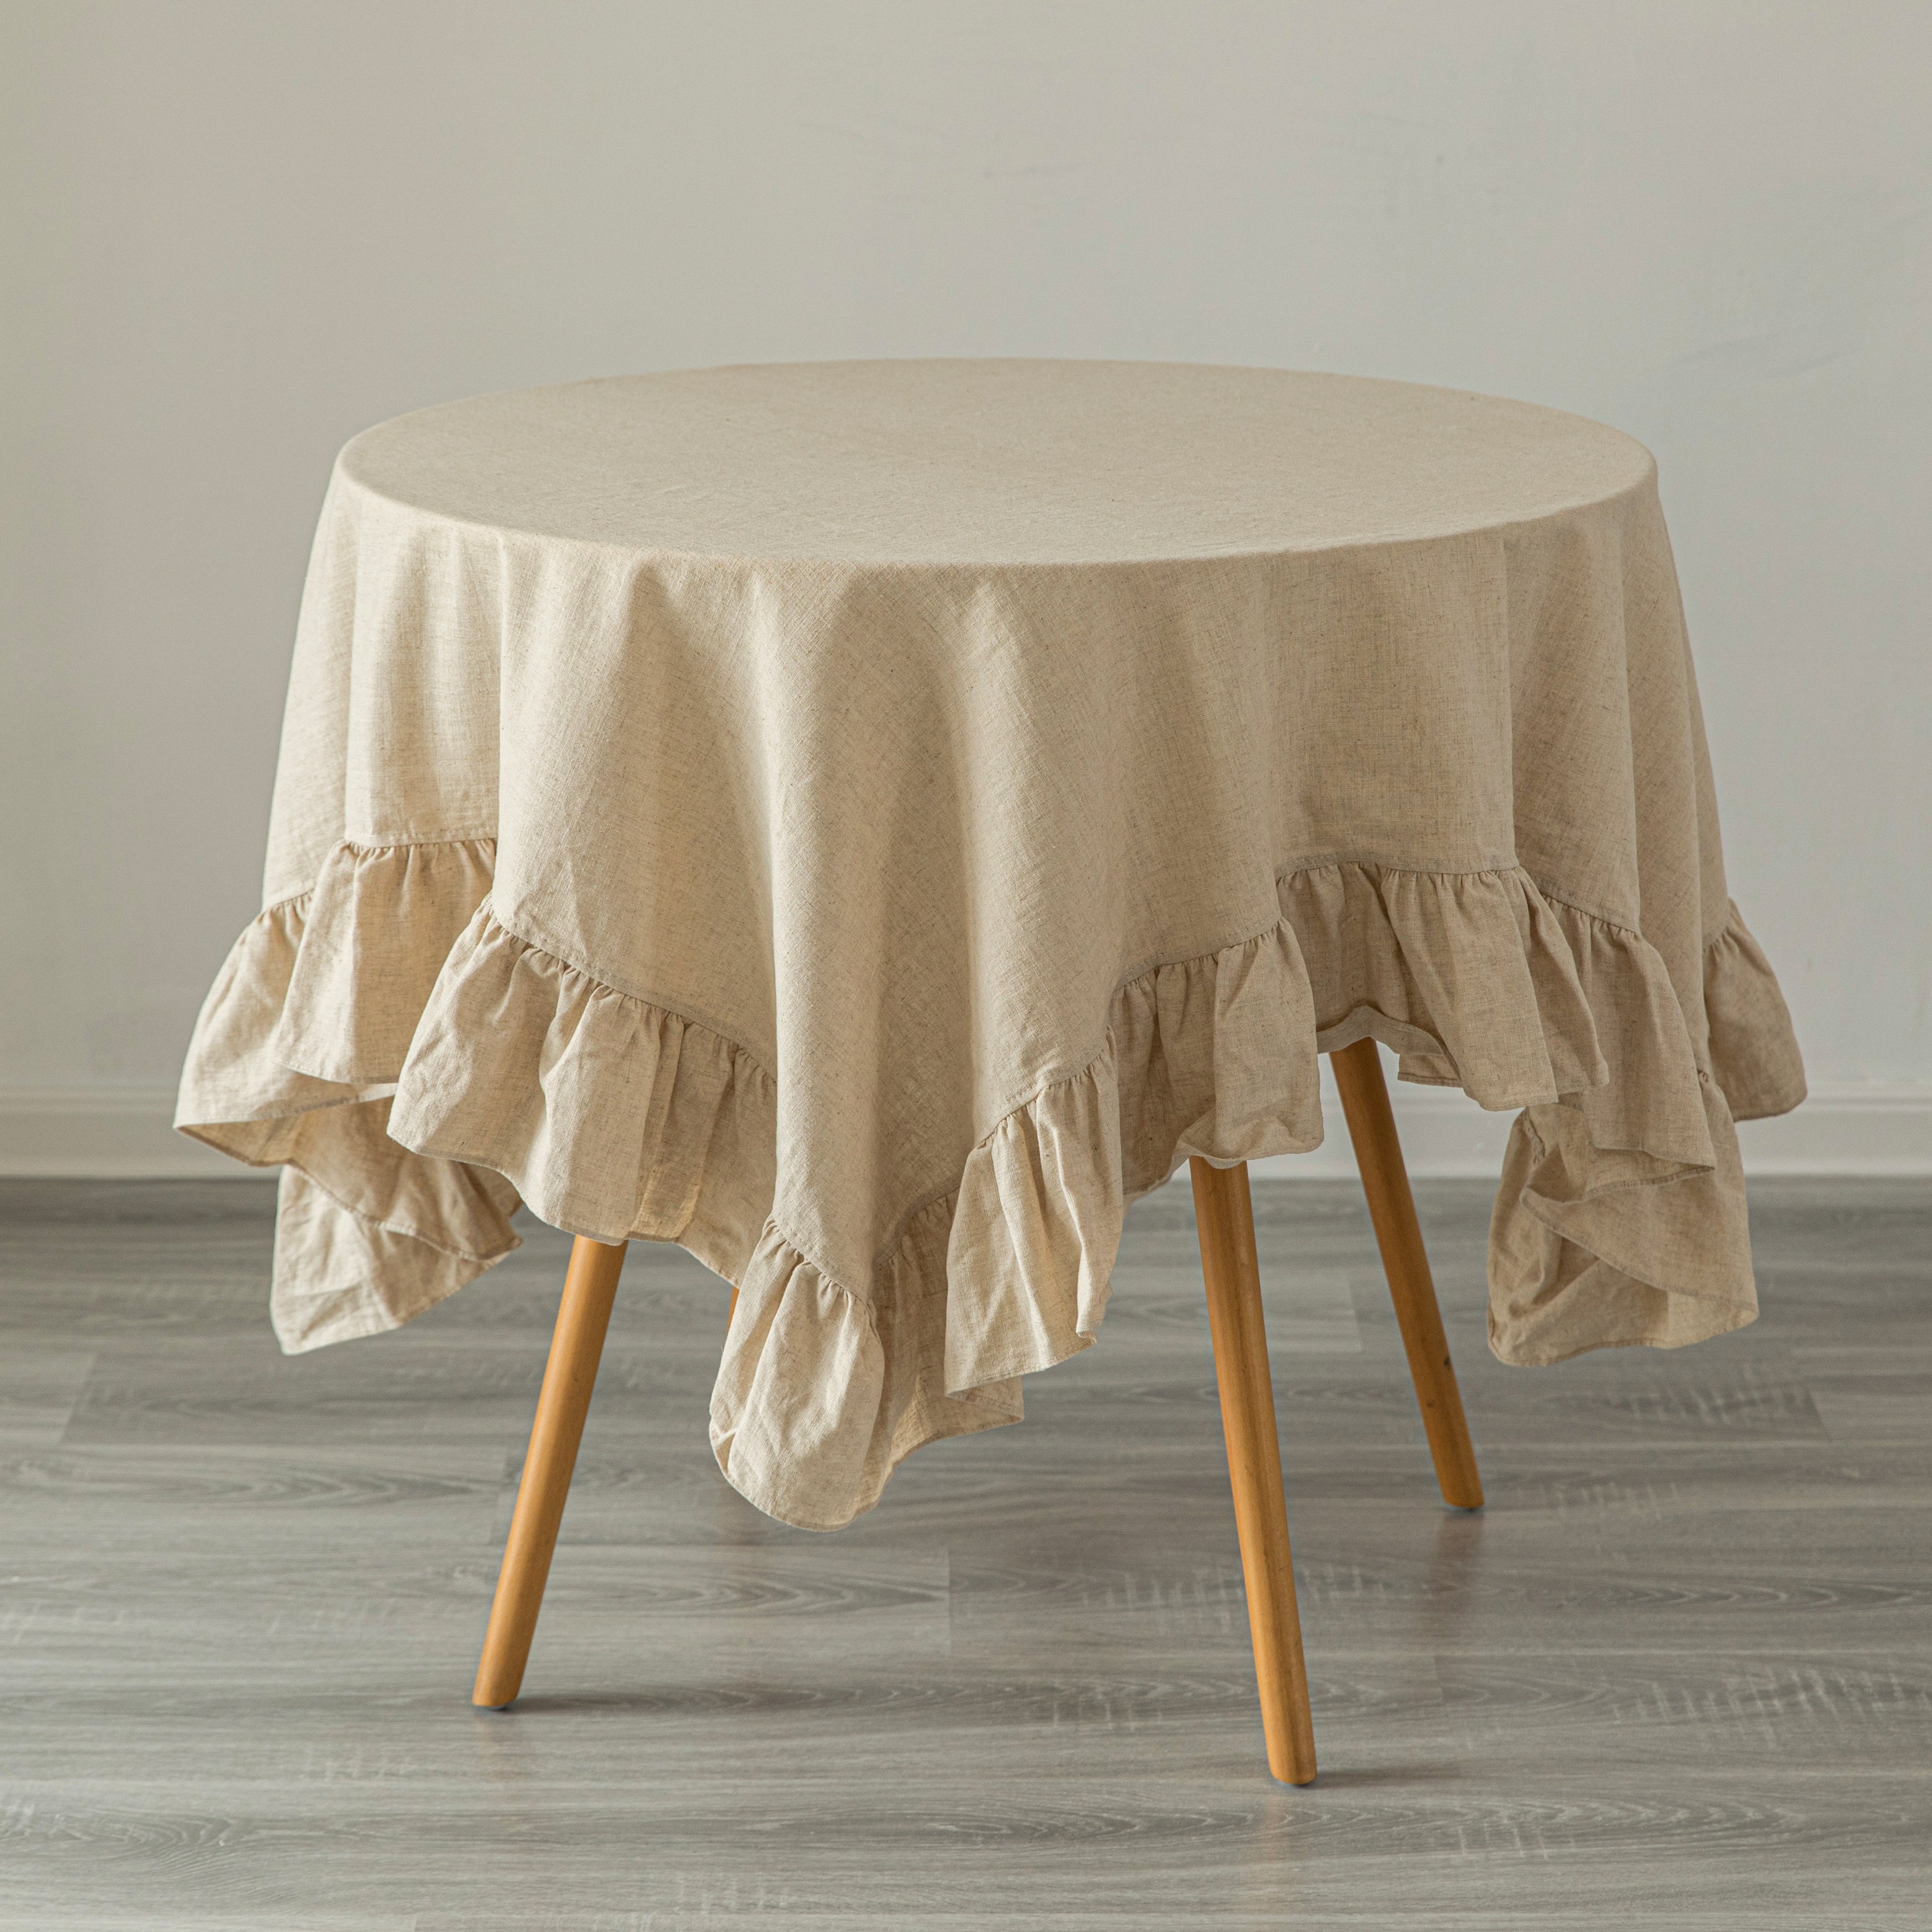 Deerlux 100 Percent Pure Linen Washable Tablecloth With Ruffle Trim - 52 X 70 In. Natural